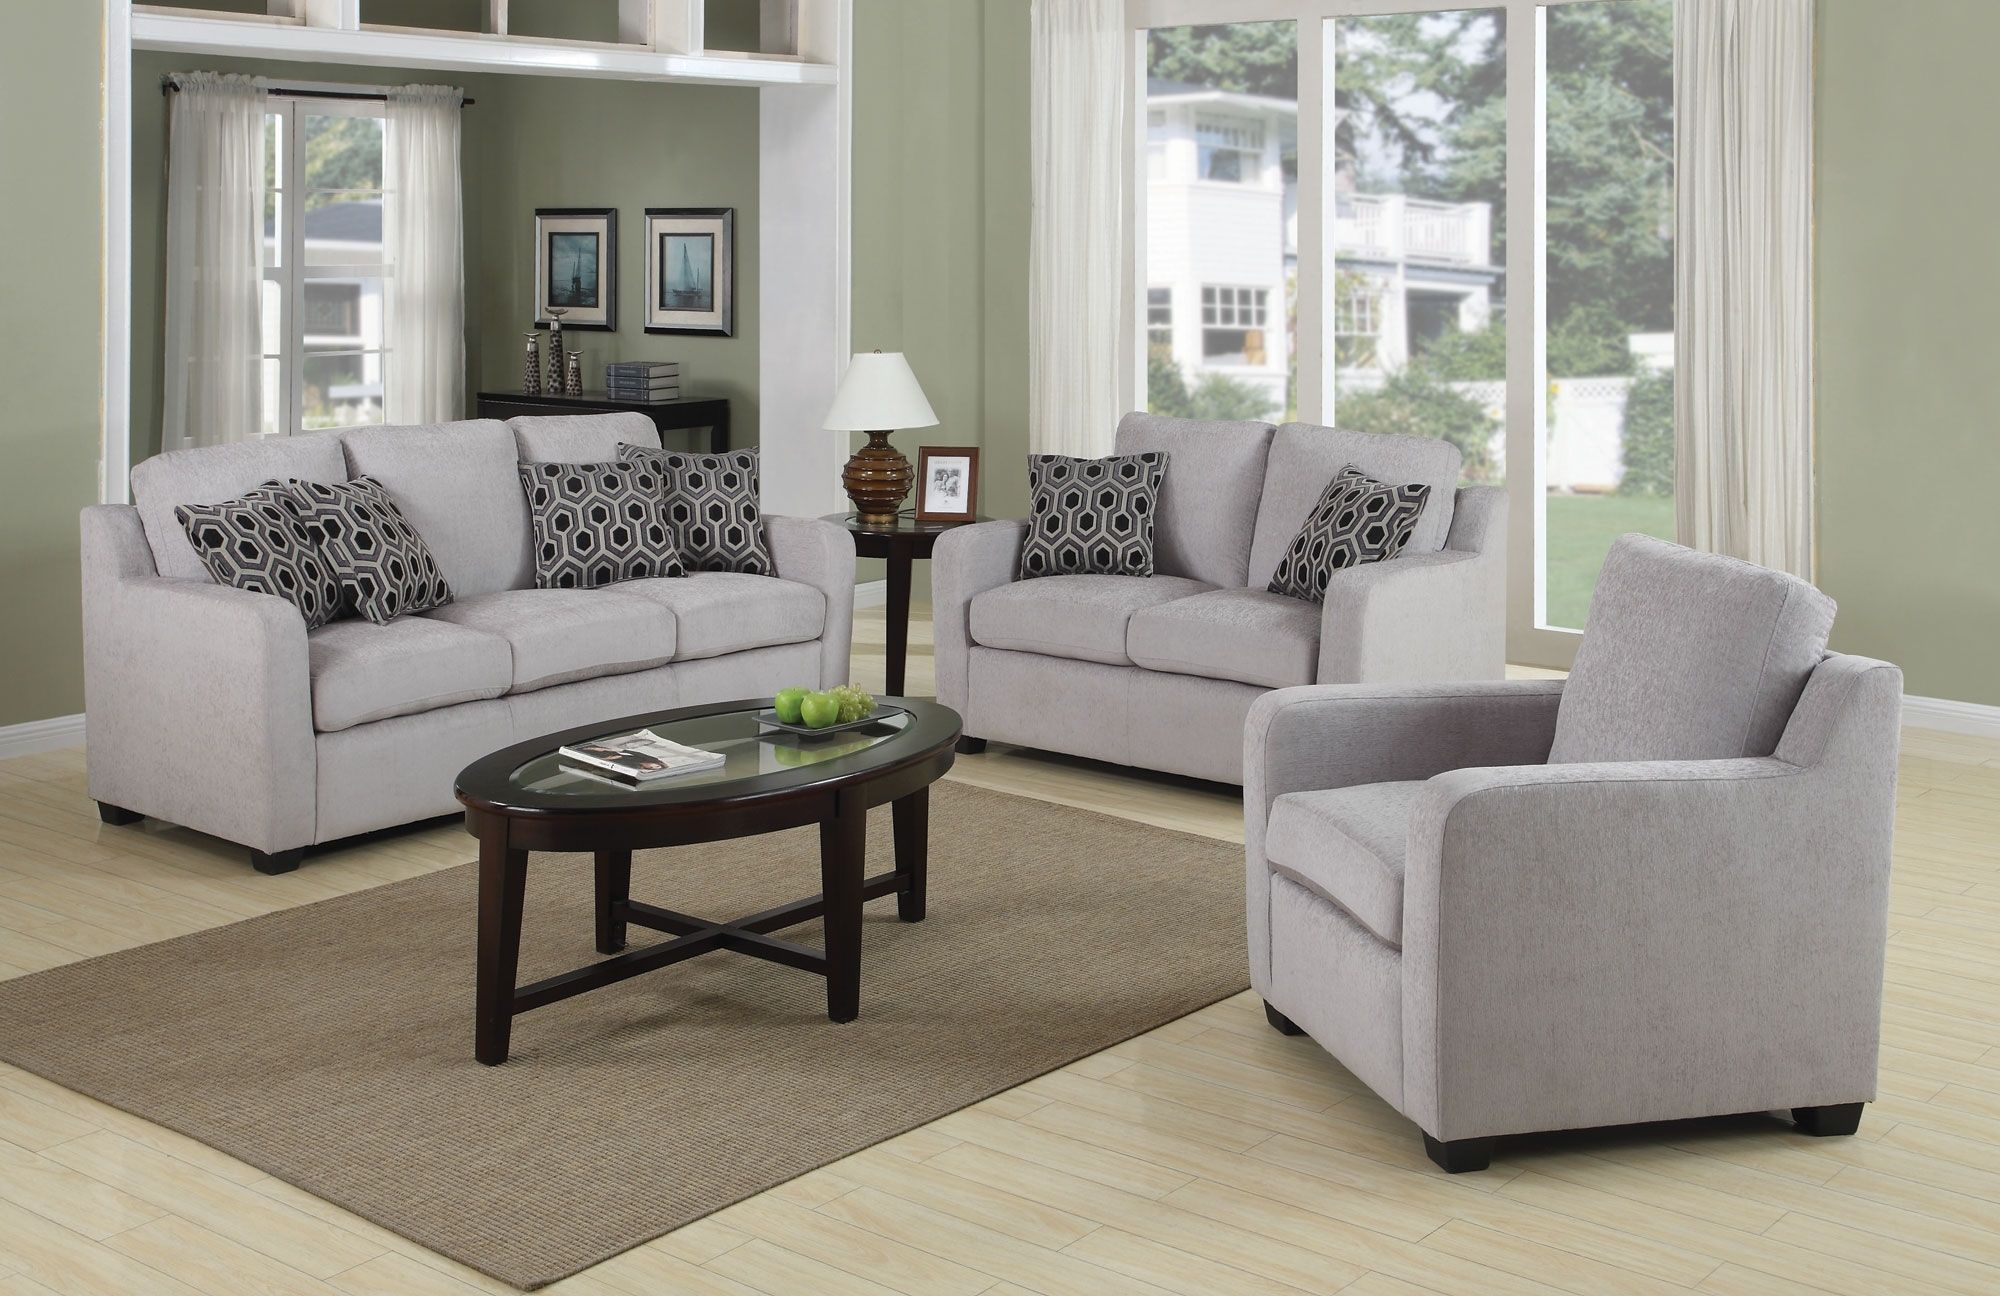 Living Room Sofa And Chair Sets Pertaining To Most Recently Released Cheap Living Room Furniture Set – Living Room Decorating Design (Photo 1 of 15)